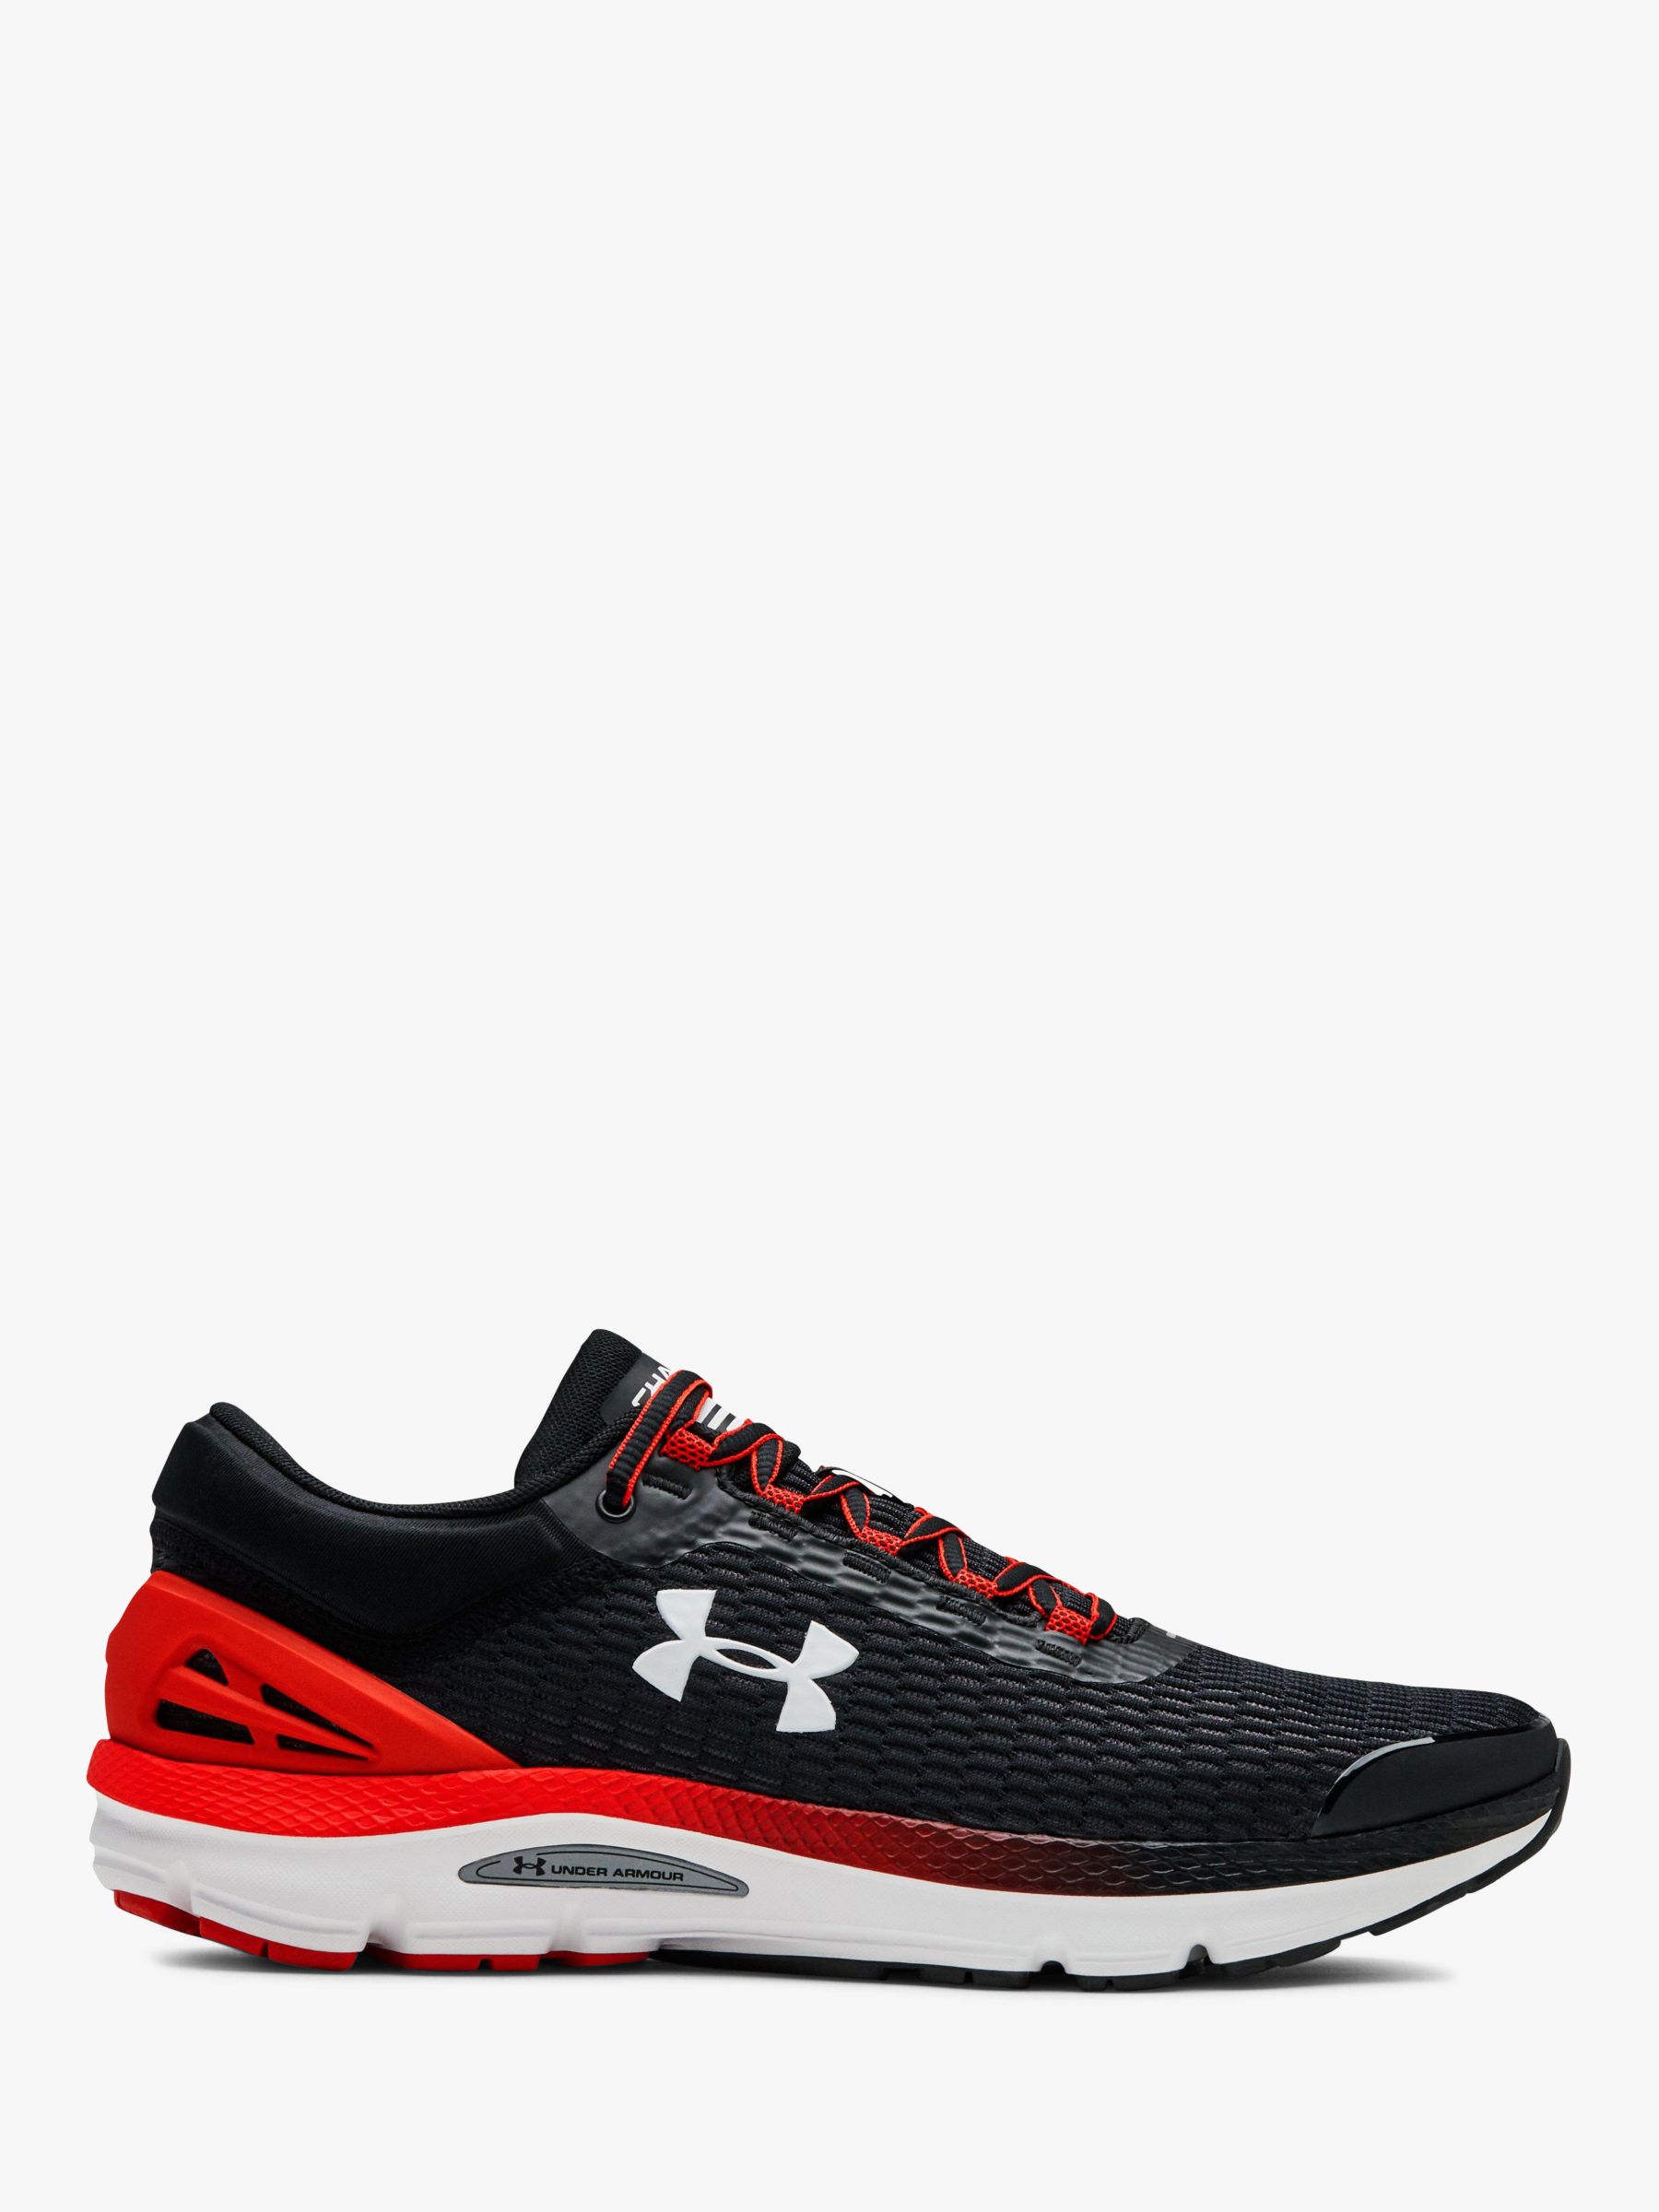 Under Armour Charged Intake 3 Men&#39;s Running Shoes, Black/Barn at John Lewis & Partners